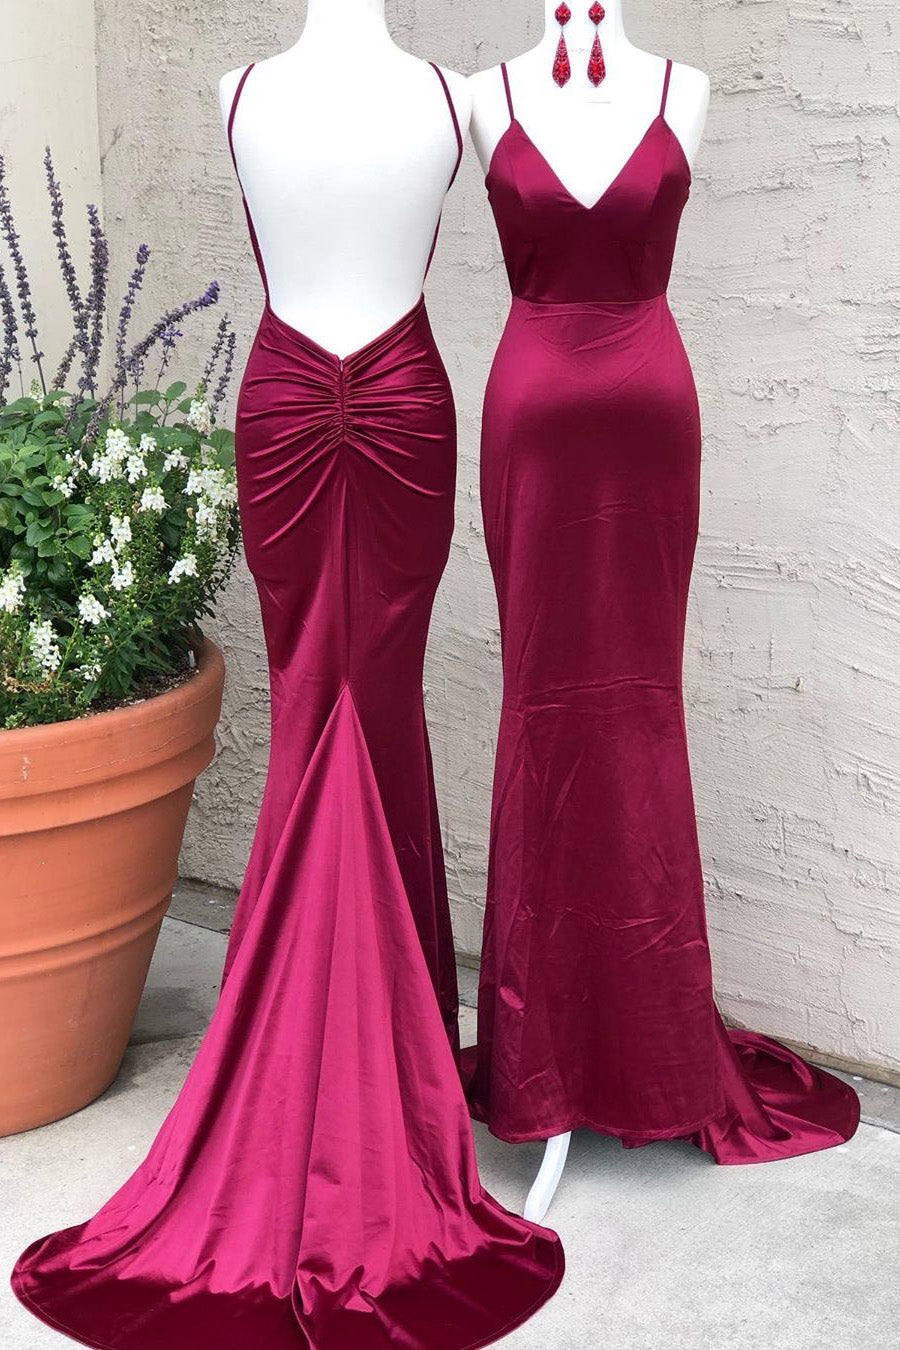 Sexy Backless Prom Dress, Prom Dresses, Pageant Dress, Evening Dress, Dance Dresses, Graduation School Party Gown